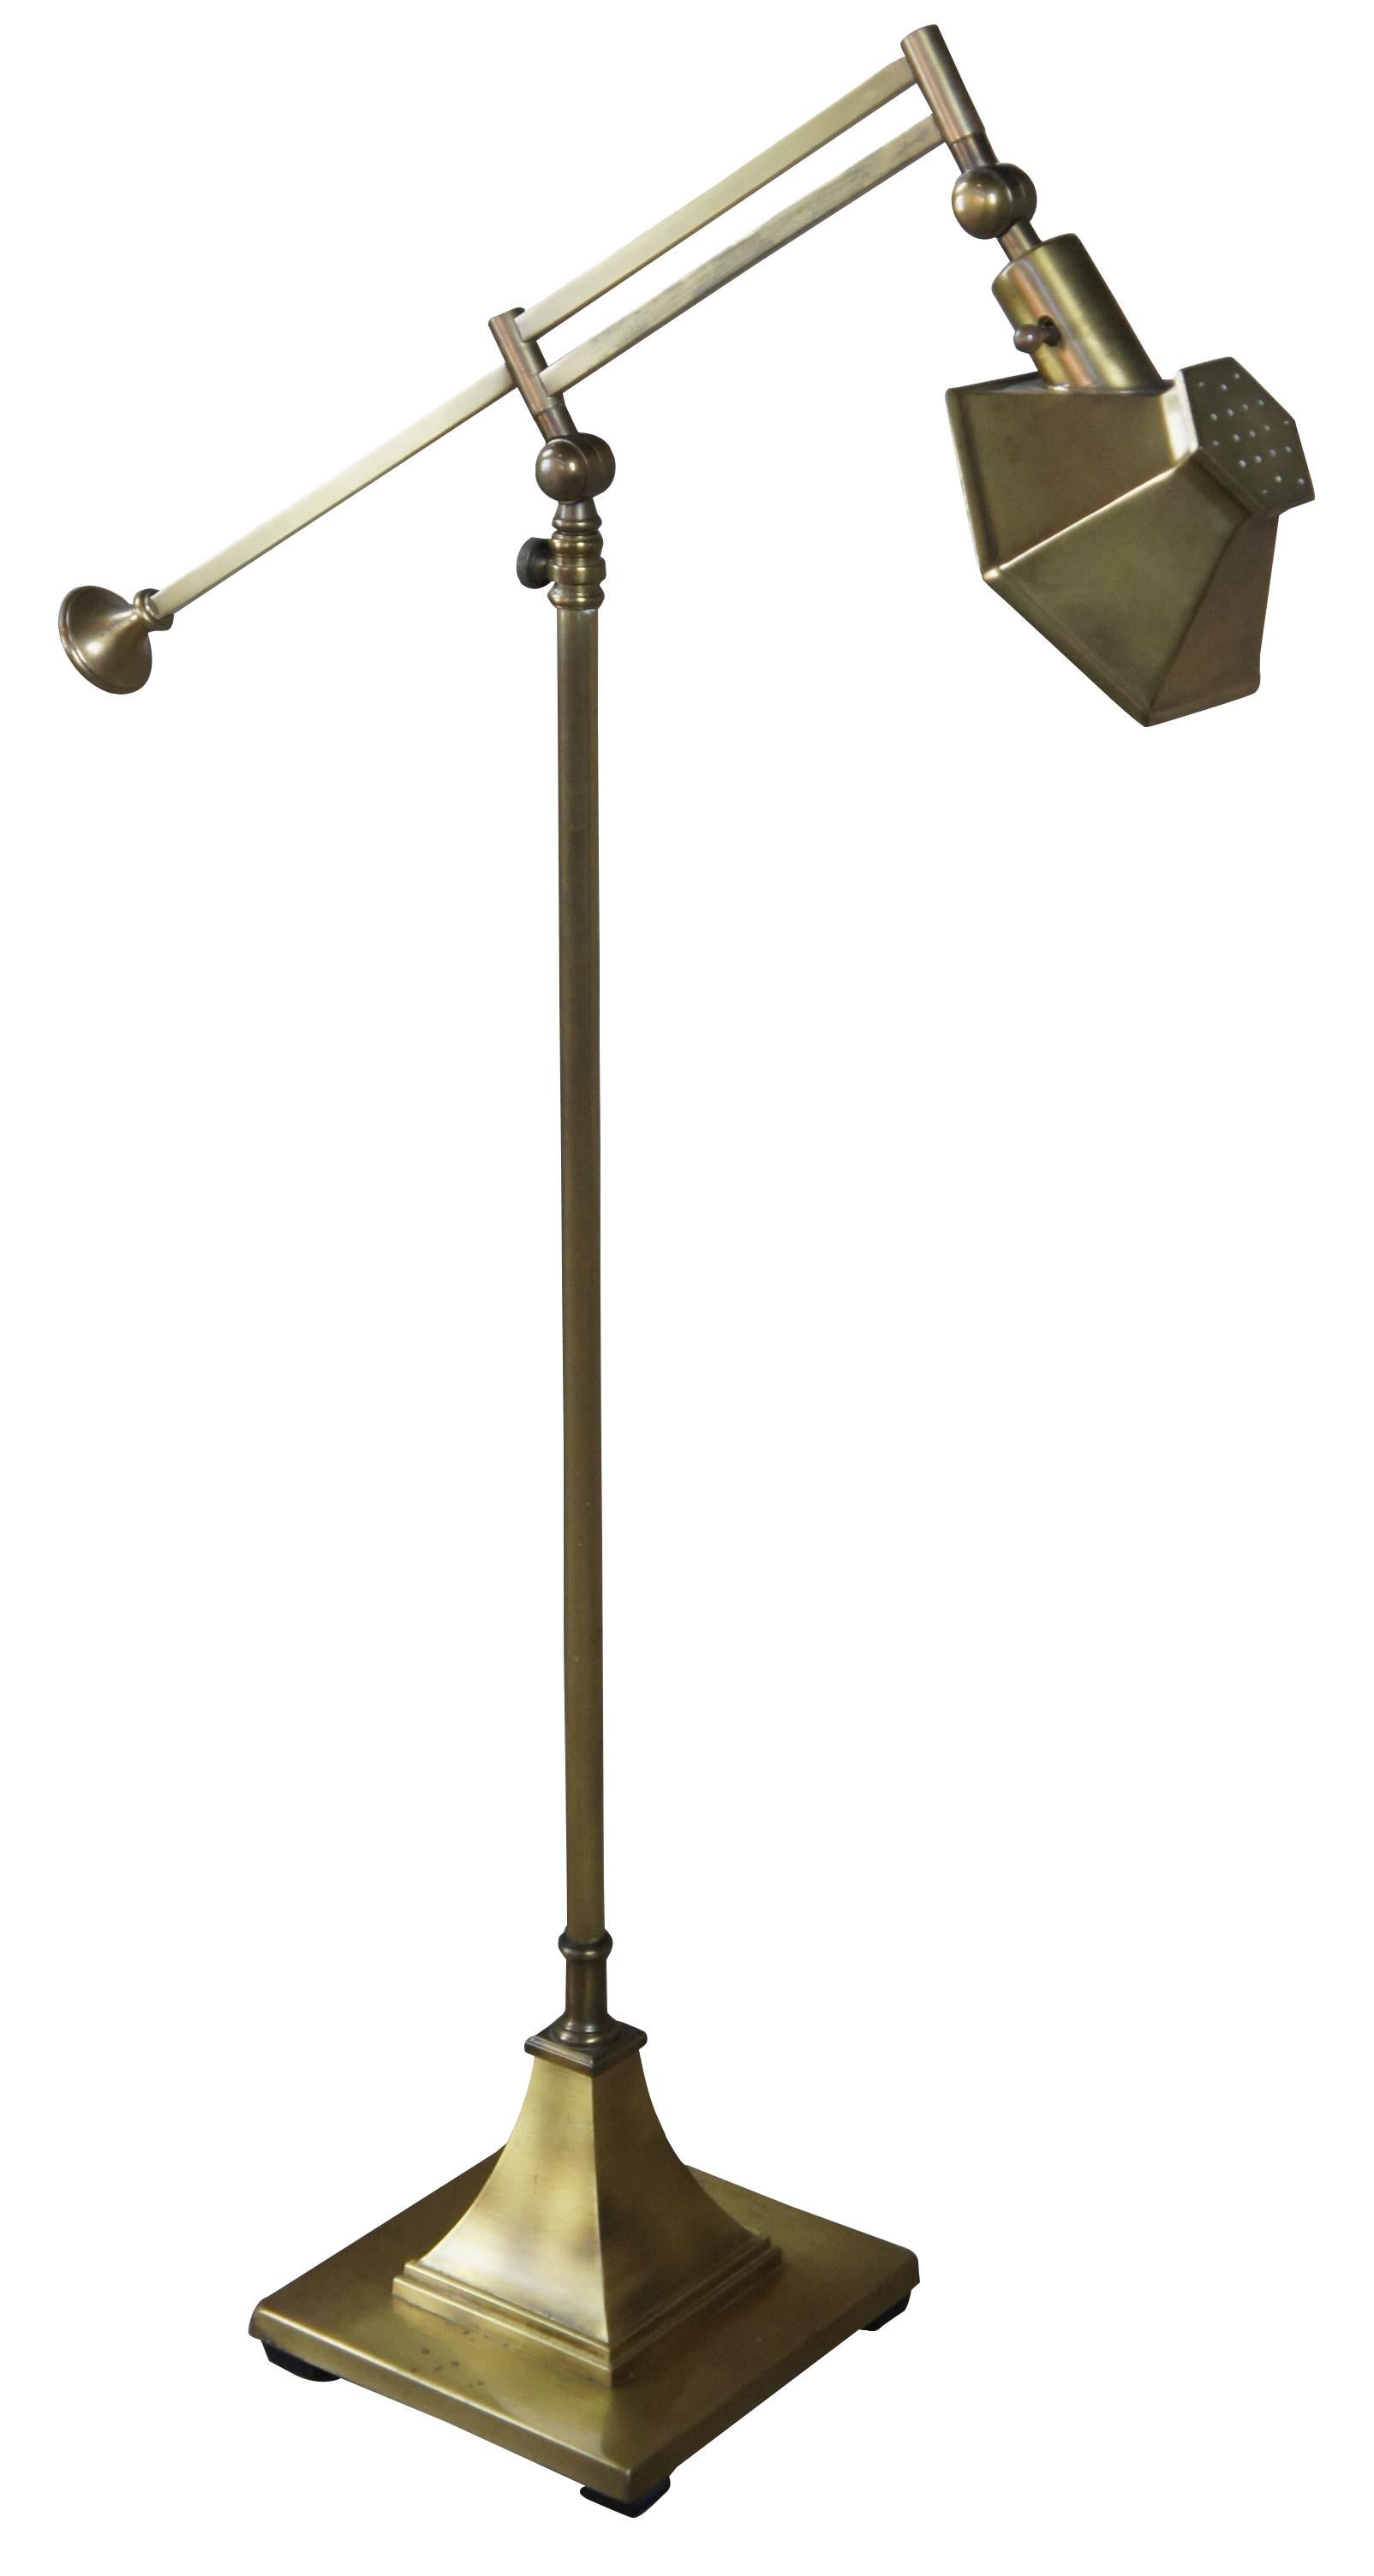 Vintage adjustable brass swing arm floor lamp. Features polished brass and modern styling.

Measures: 10